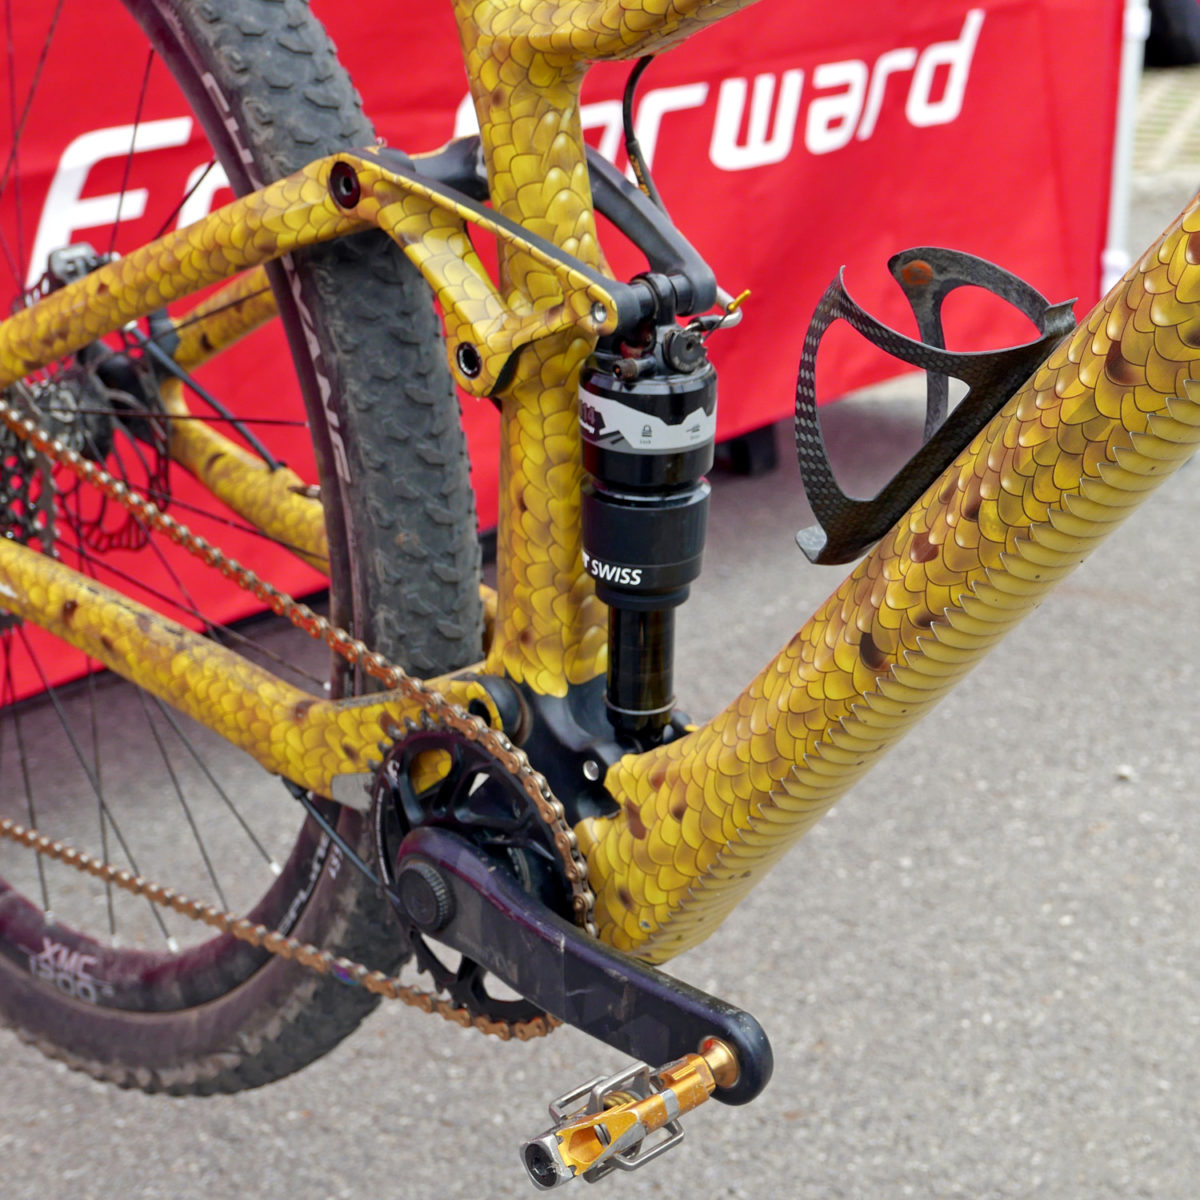 Spotted: Updated Felt Edict carbon mountain bike prototype, in snakeskin?